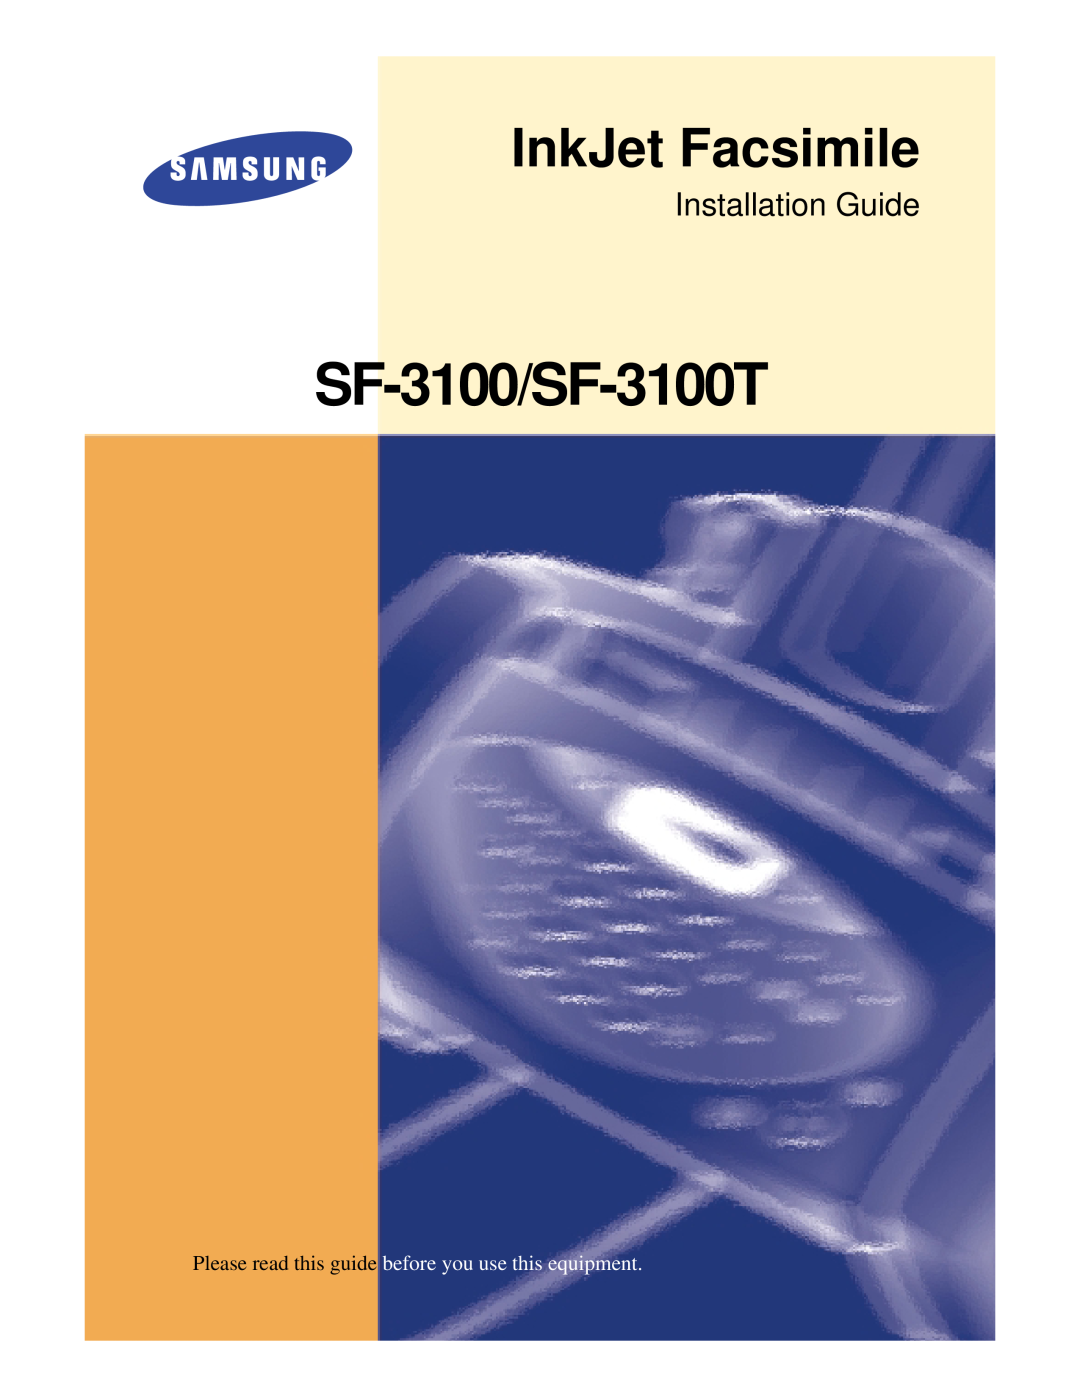 Samsung Installation Guide, SF-3100/SF-3100T, InkJet Facsimile, Please read this guide before you use this equipment 